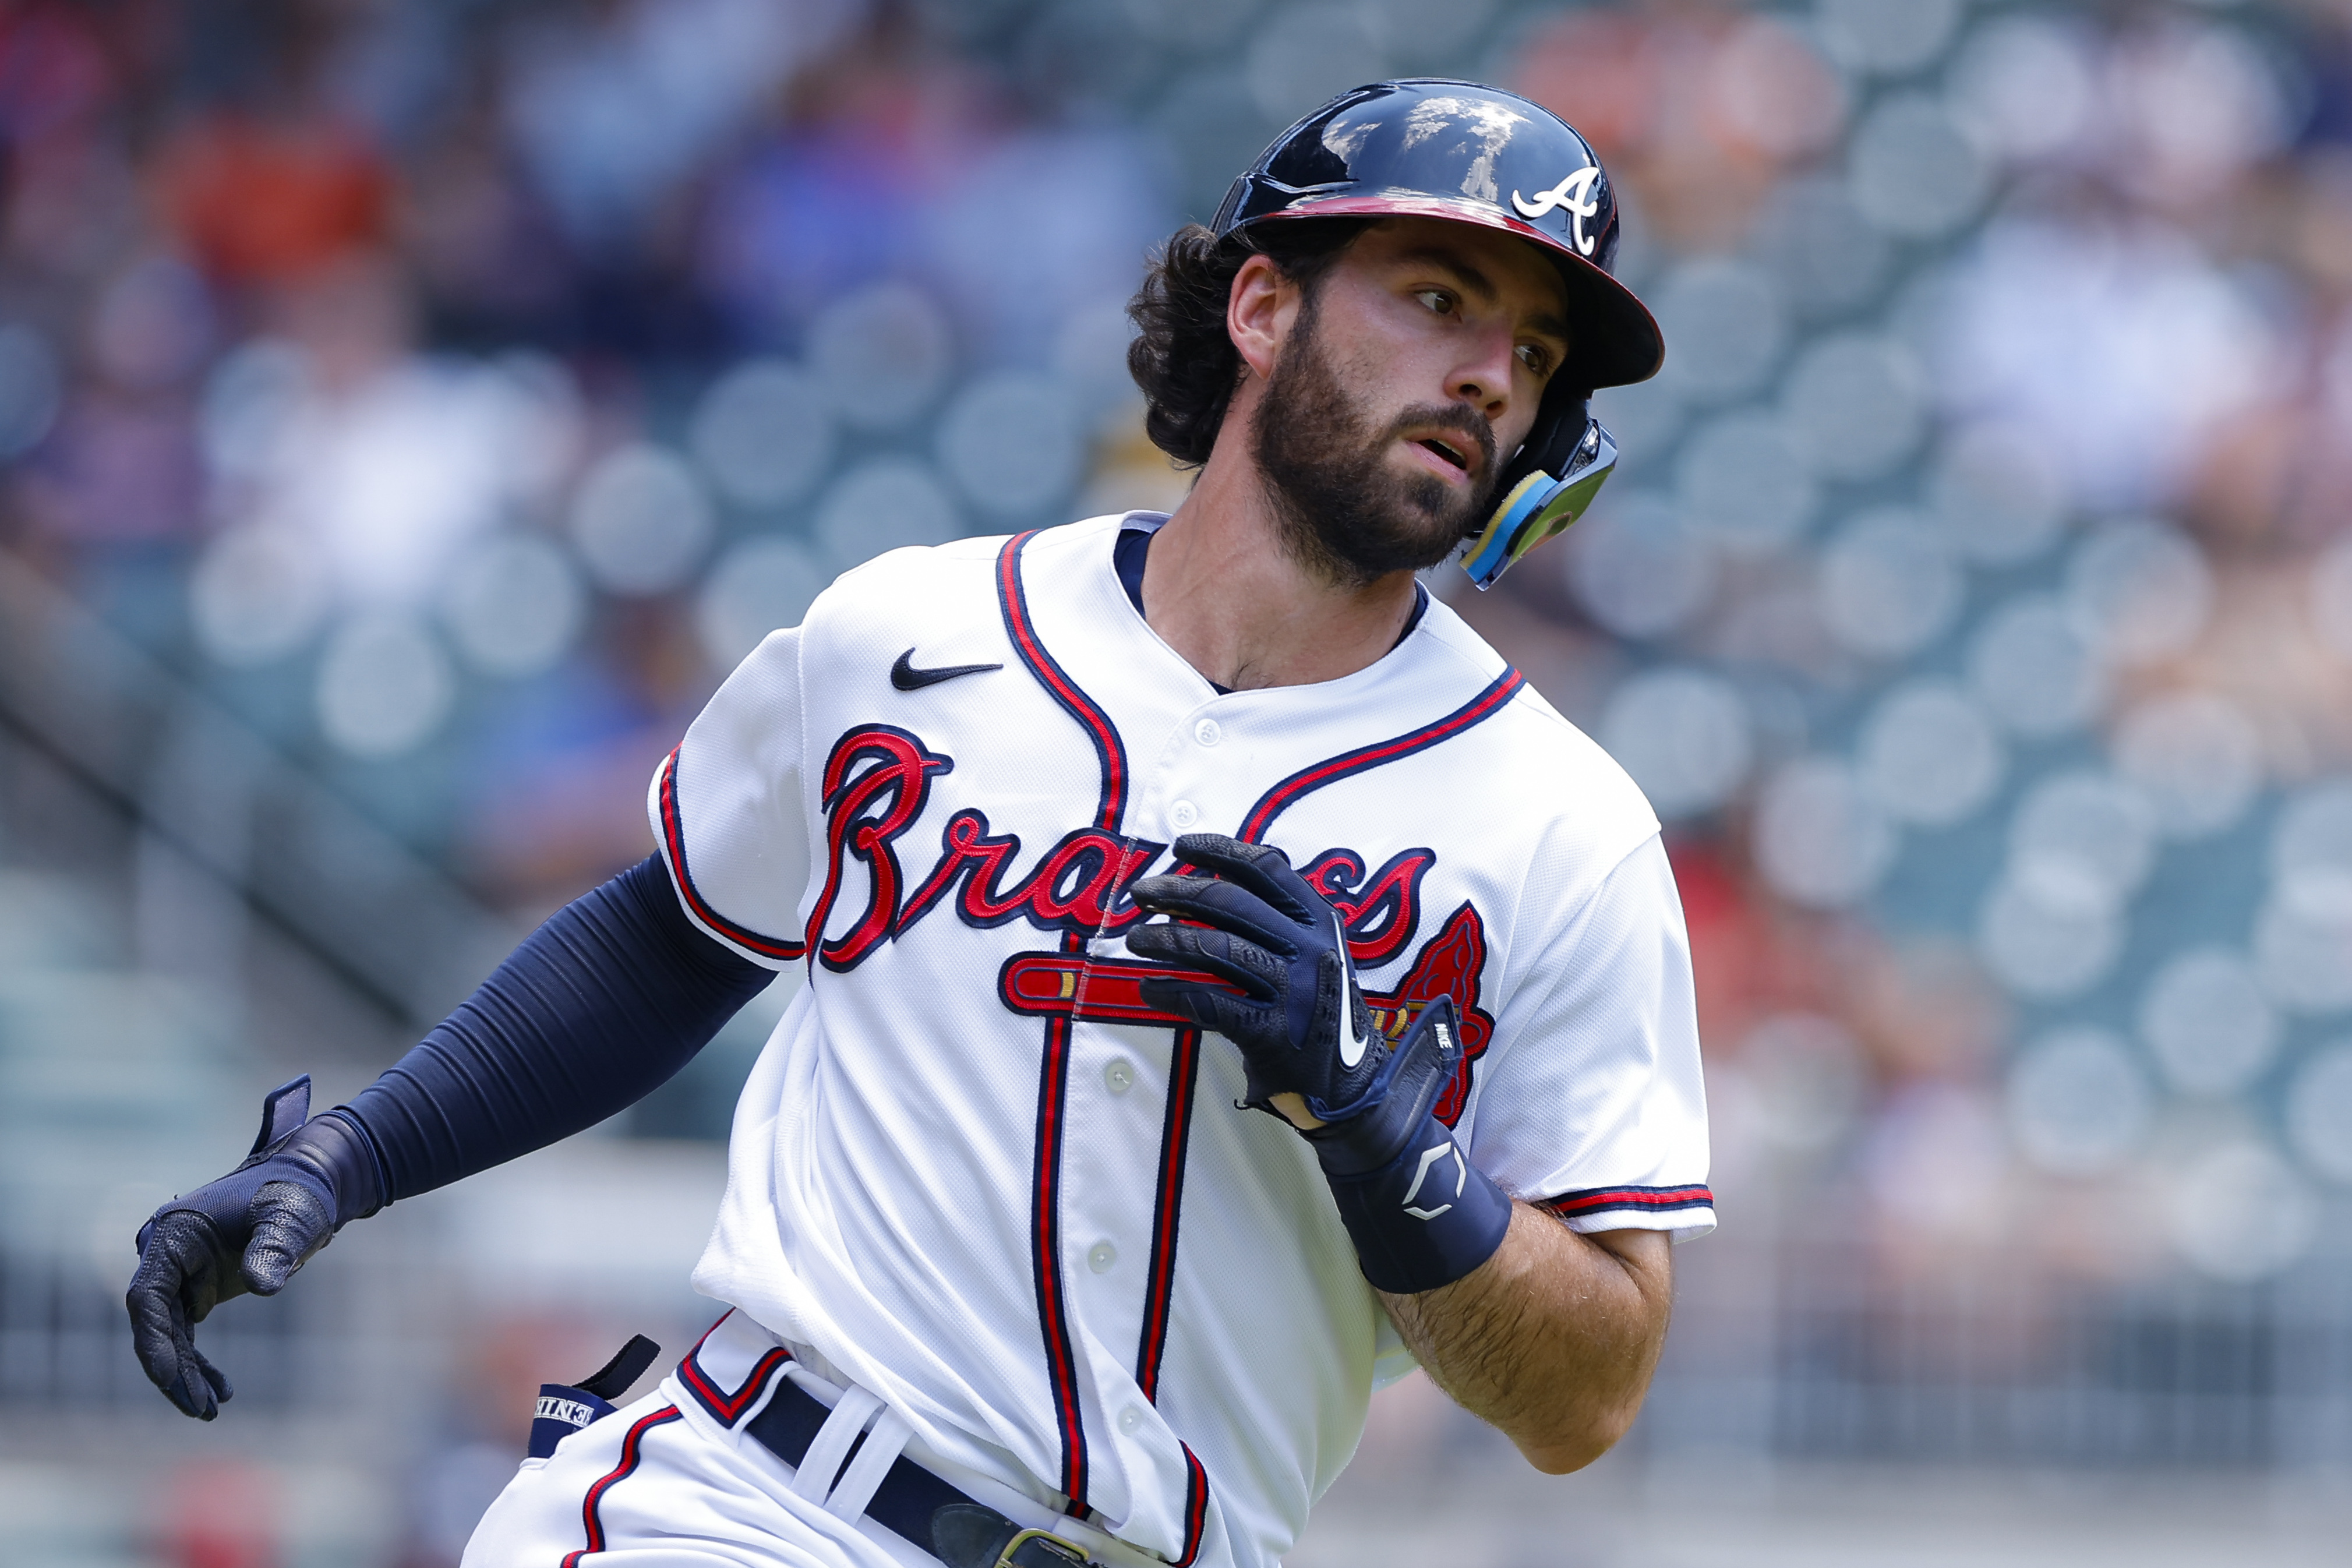 Dansby Swanson wins Braves' Heart and Hustle award